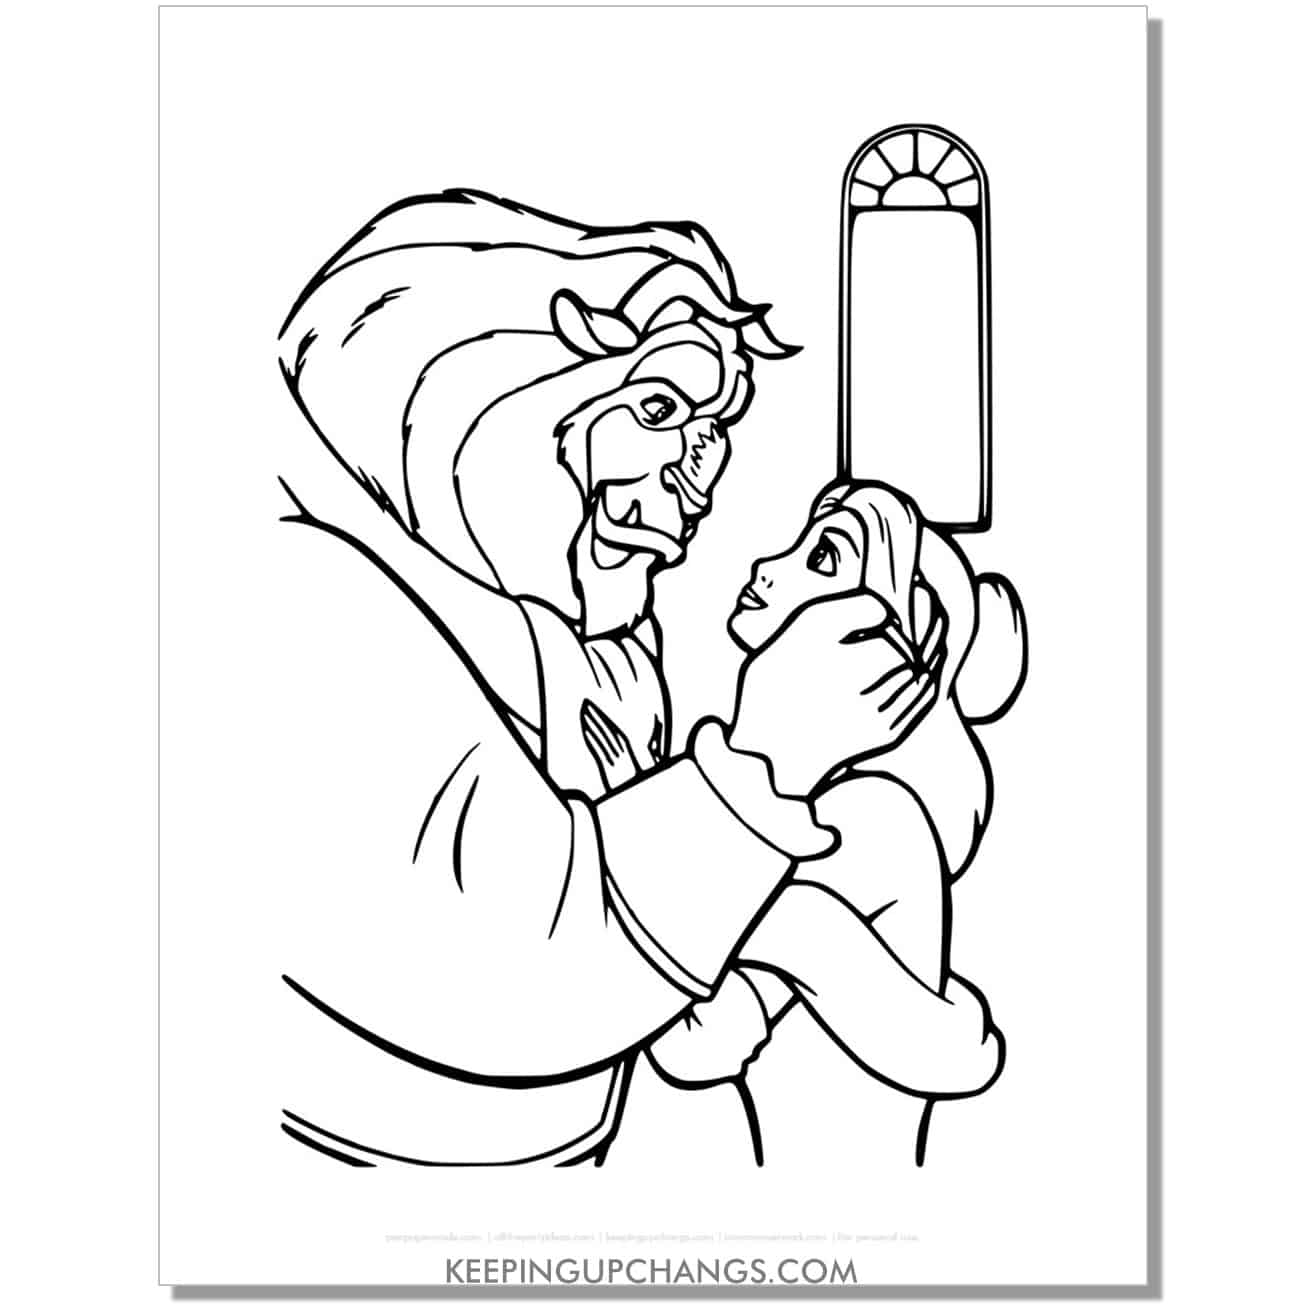 beauty and beast gazing into each other's eyes coloring page, sheet.